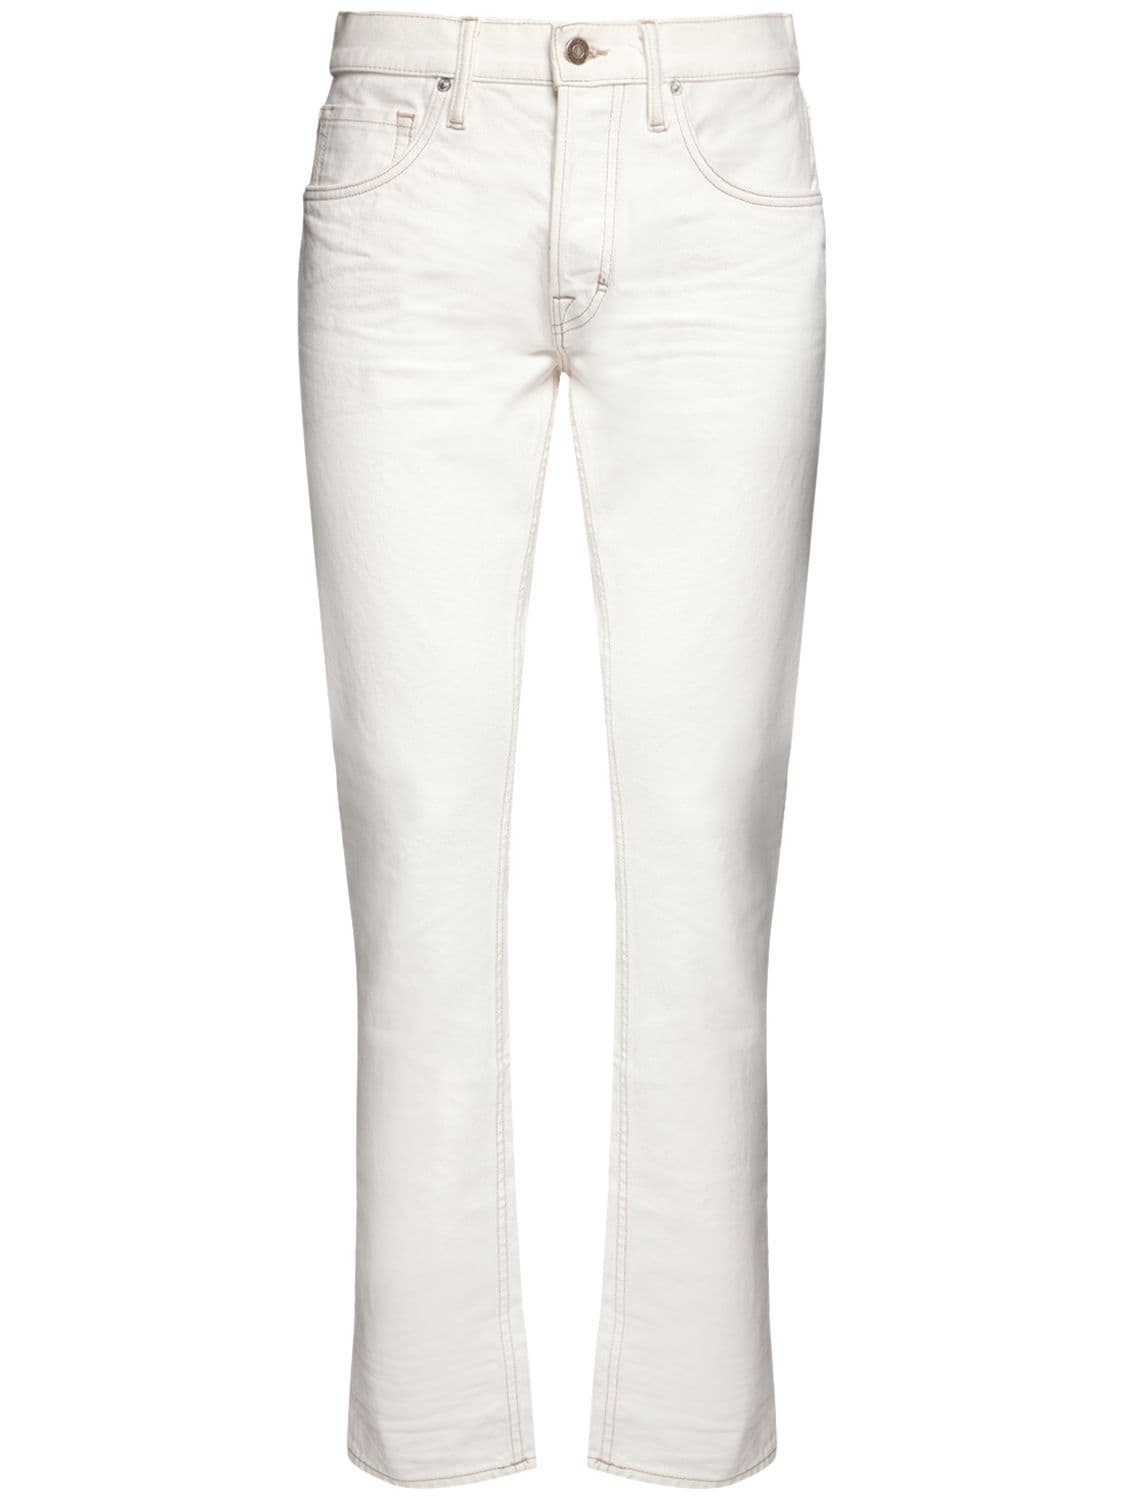 TOM FORD TAPERED FIT COMFORT DENIM trousers,73IY27011-TJEX0